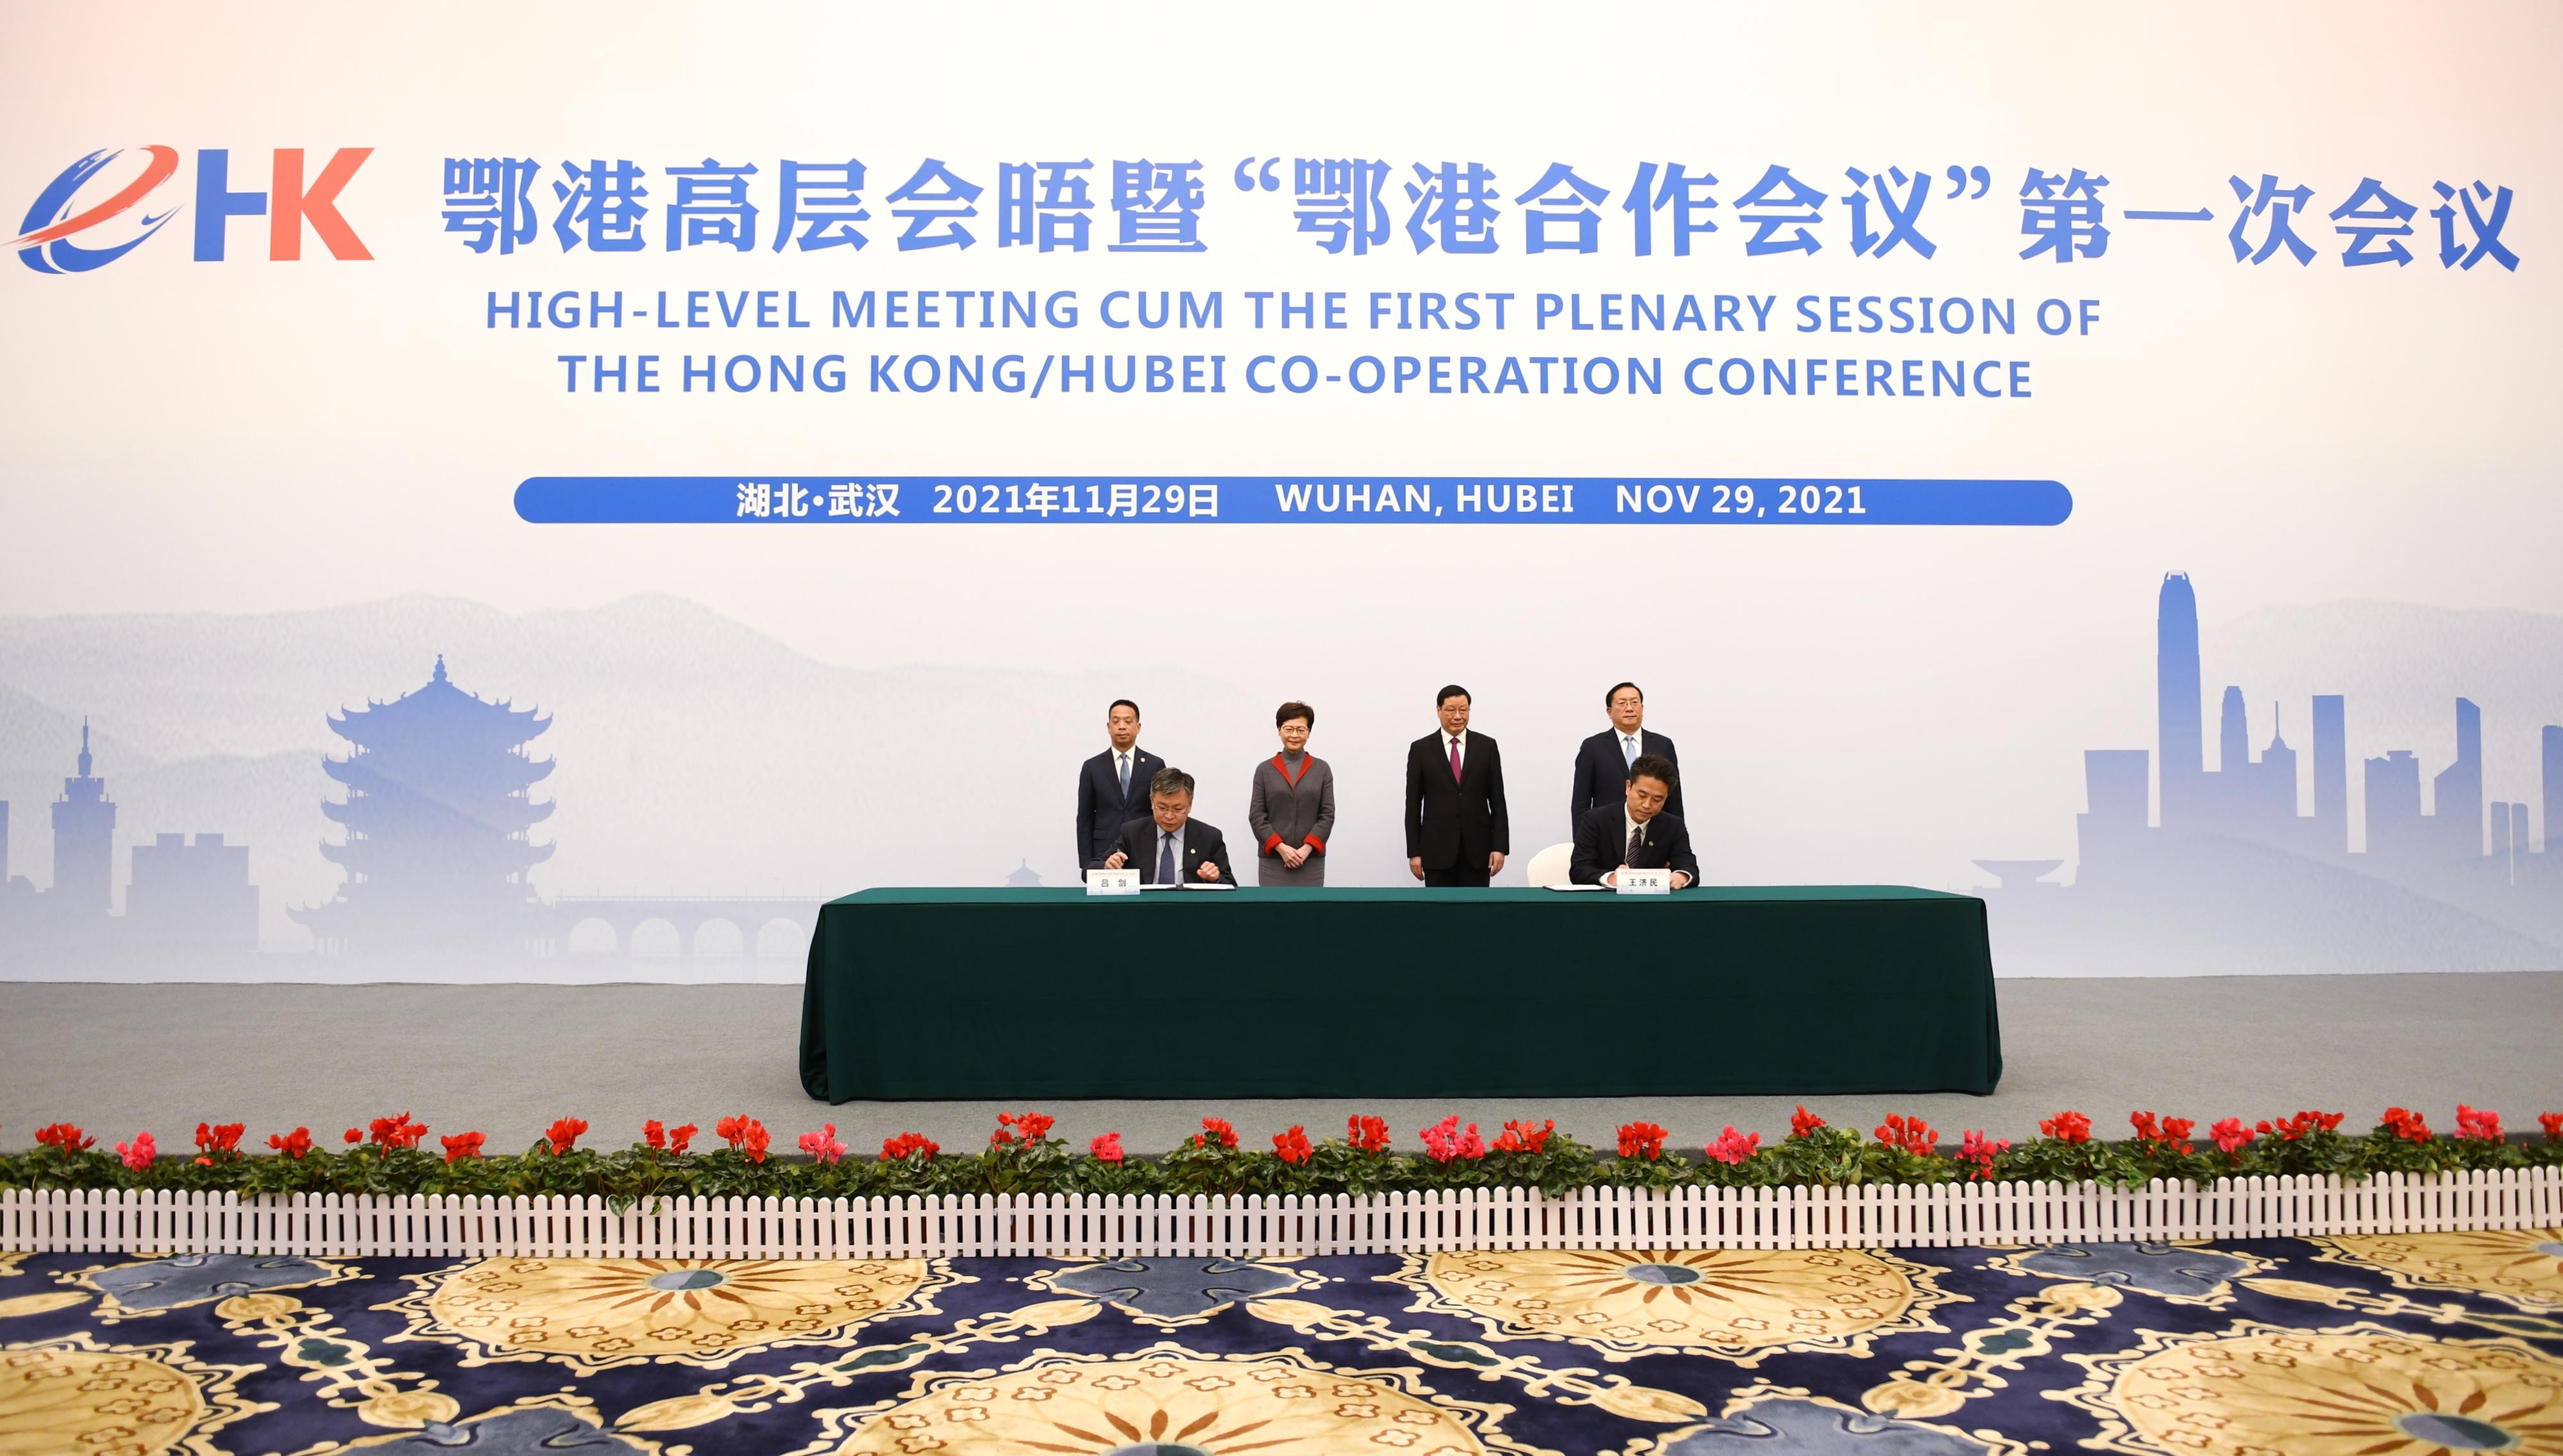 The Chief Executive, Mrs Carrie Lam, today (November 29) led a delegation of the Hong Kong Special Administrative Region Government to attend the High-Level Meeting cum First Plenary Session of the Hong Kong/Hubei Co-operation Conference. Photo shows (back row, from left) Deputy Director of the Hong Kong and Macao Affairs Office of the State Council Mr Huang Liuquan; Mrs Lam; the Secretary of the CPC Hubei Provincial Committee, Mr Ying Yong; and the Governor of Hubei Province, Mr Wang Zhonglin, witnessing the signing of the Memorandum of Understanding on Deepening Hubei-Hong Kong Economic Co-operation.